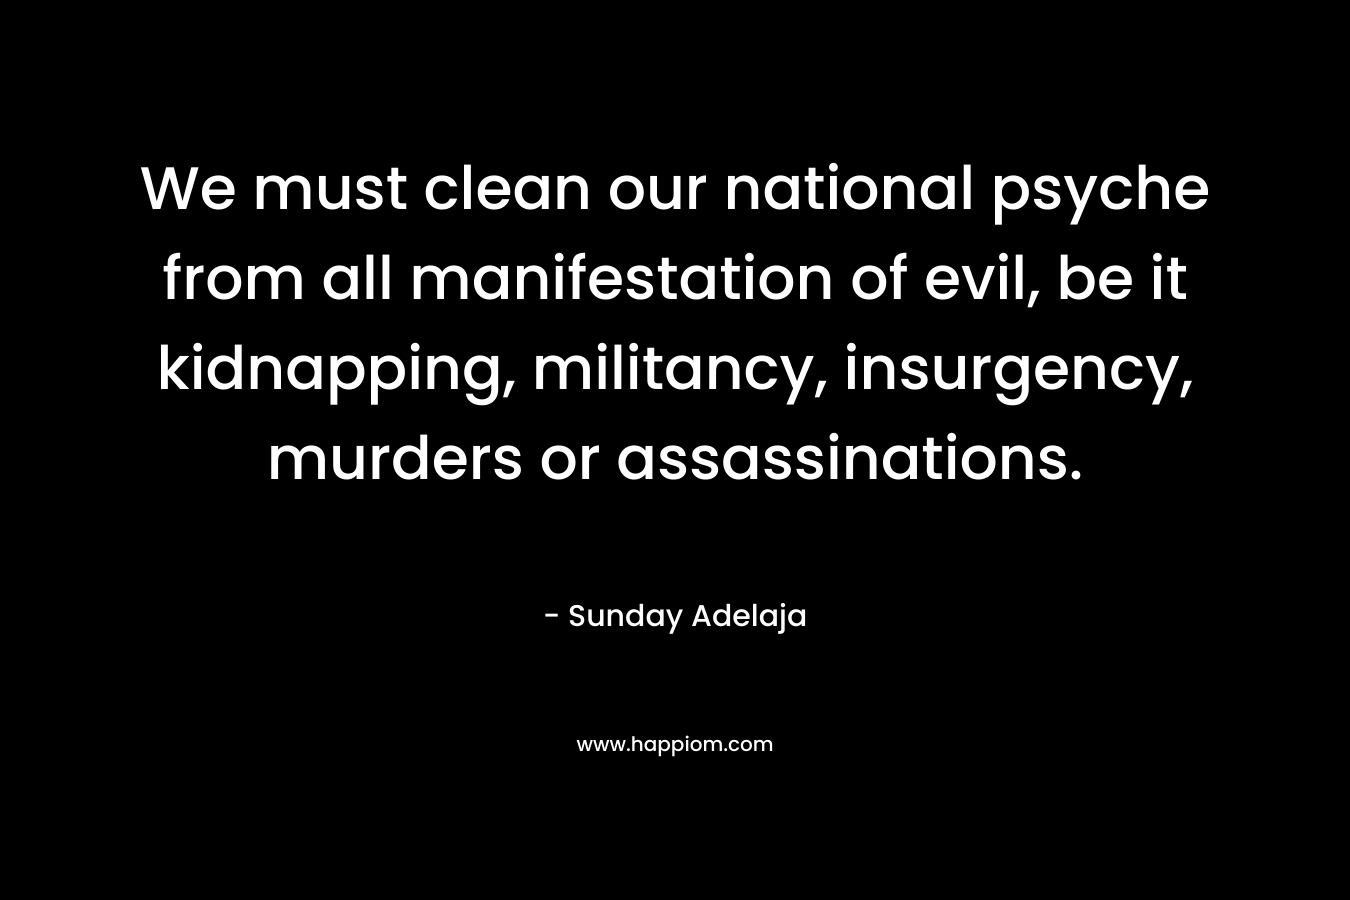 We must clean our national psyche from all manifestation of evil, be it kidnapping, militancy, insurgency, murders or assassinations. – Sunday Adelaja